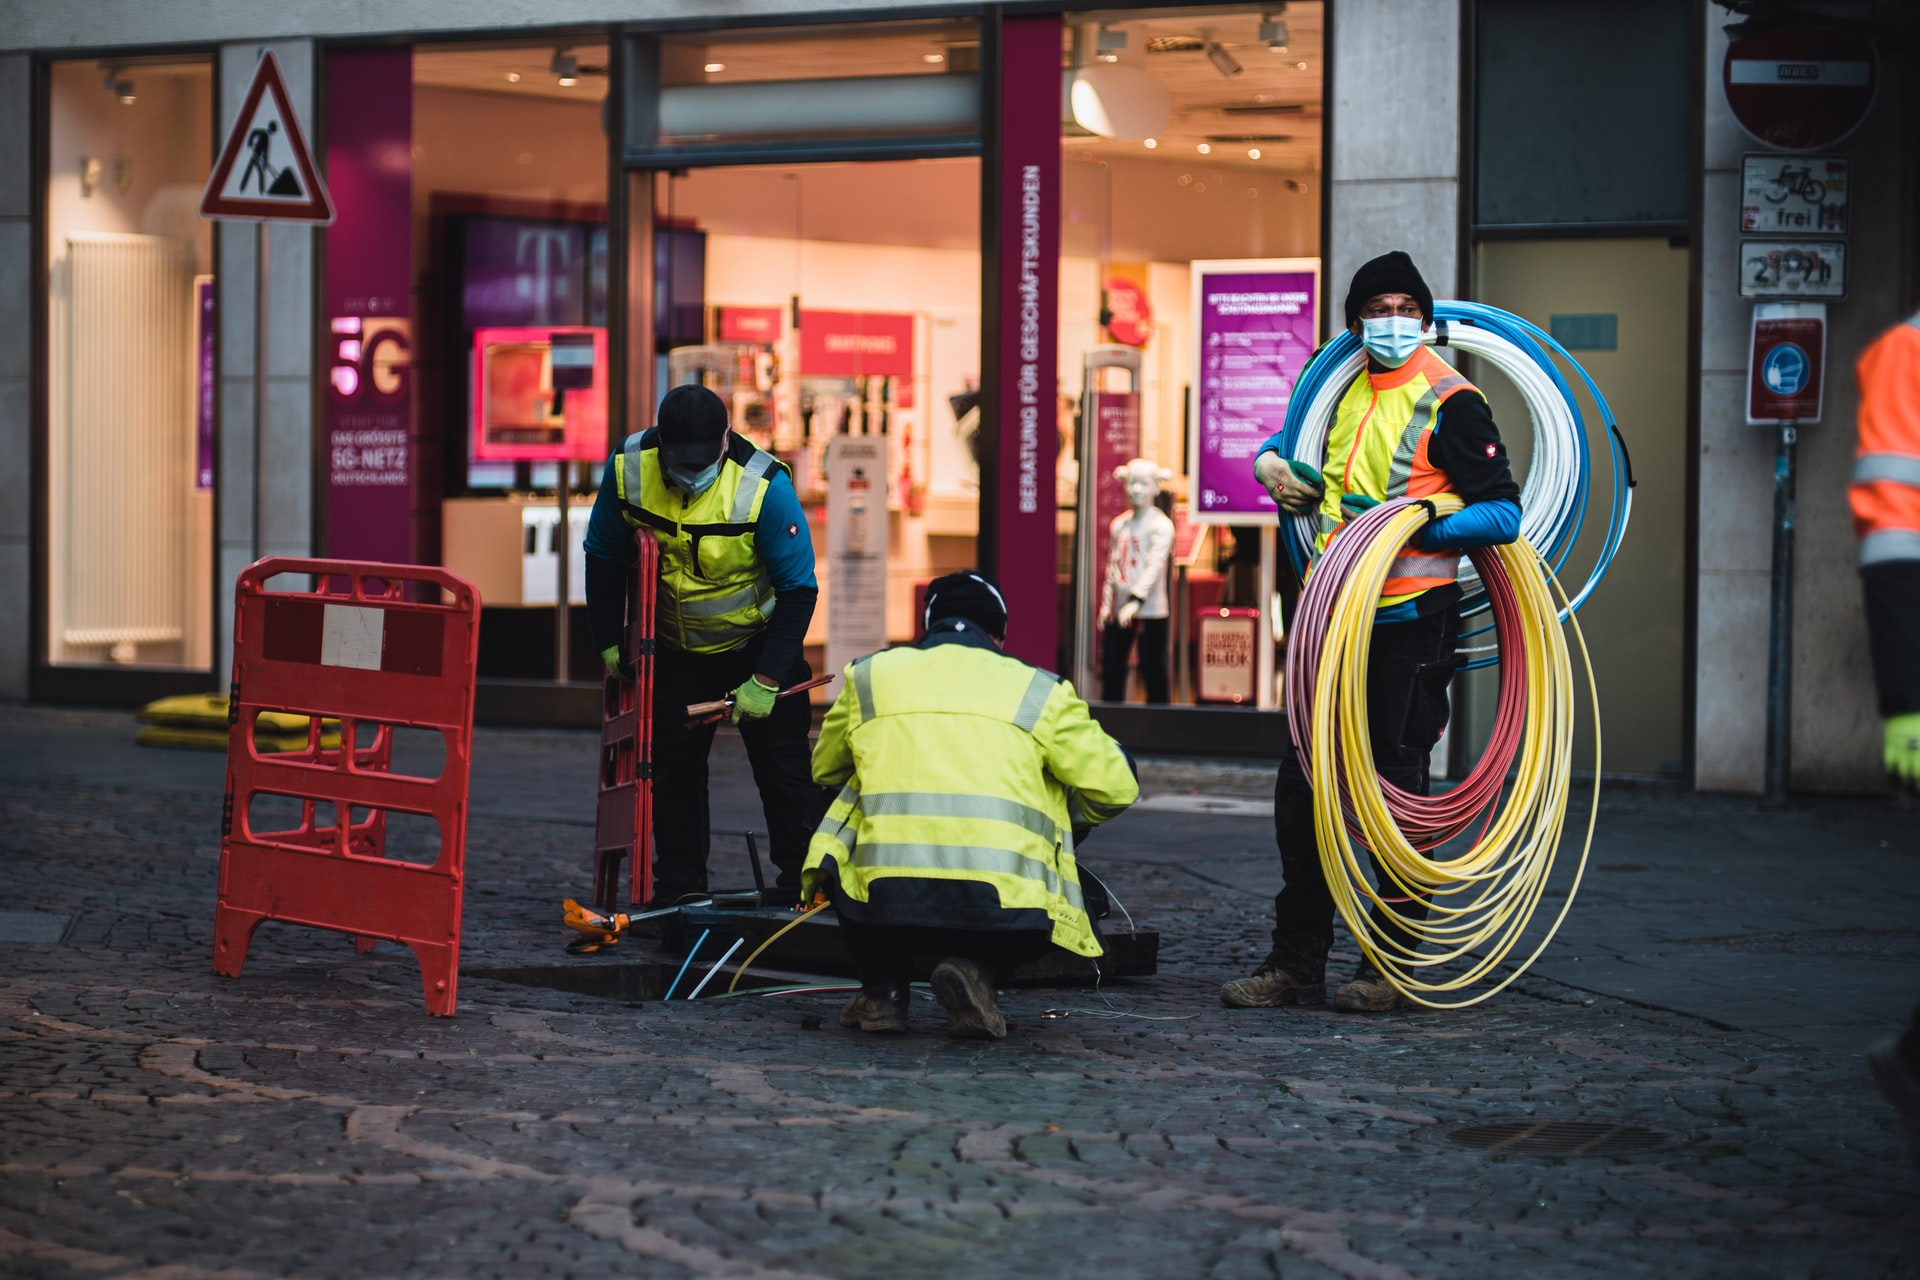 Technicians installing fiber optic cable. | Photo by Mika Baumeister on Unsplash